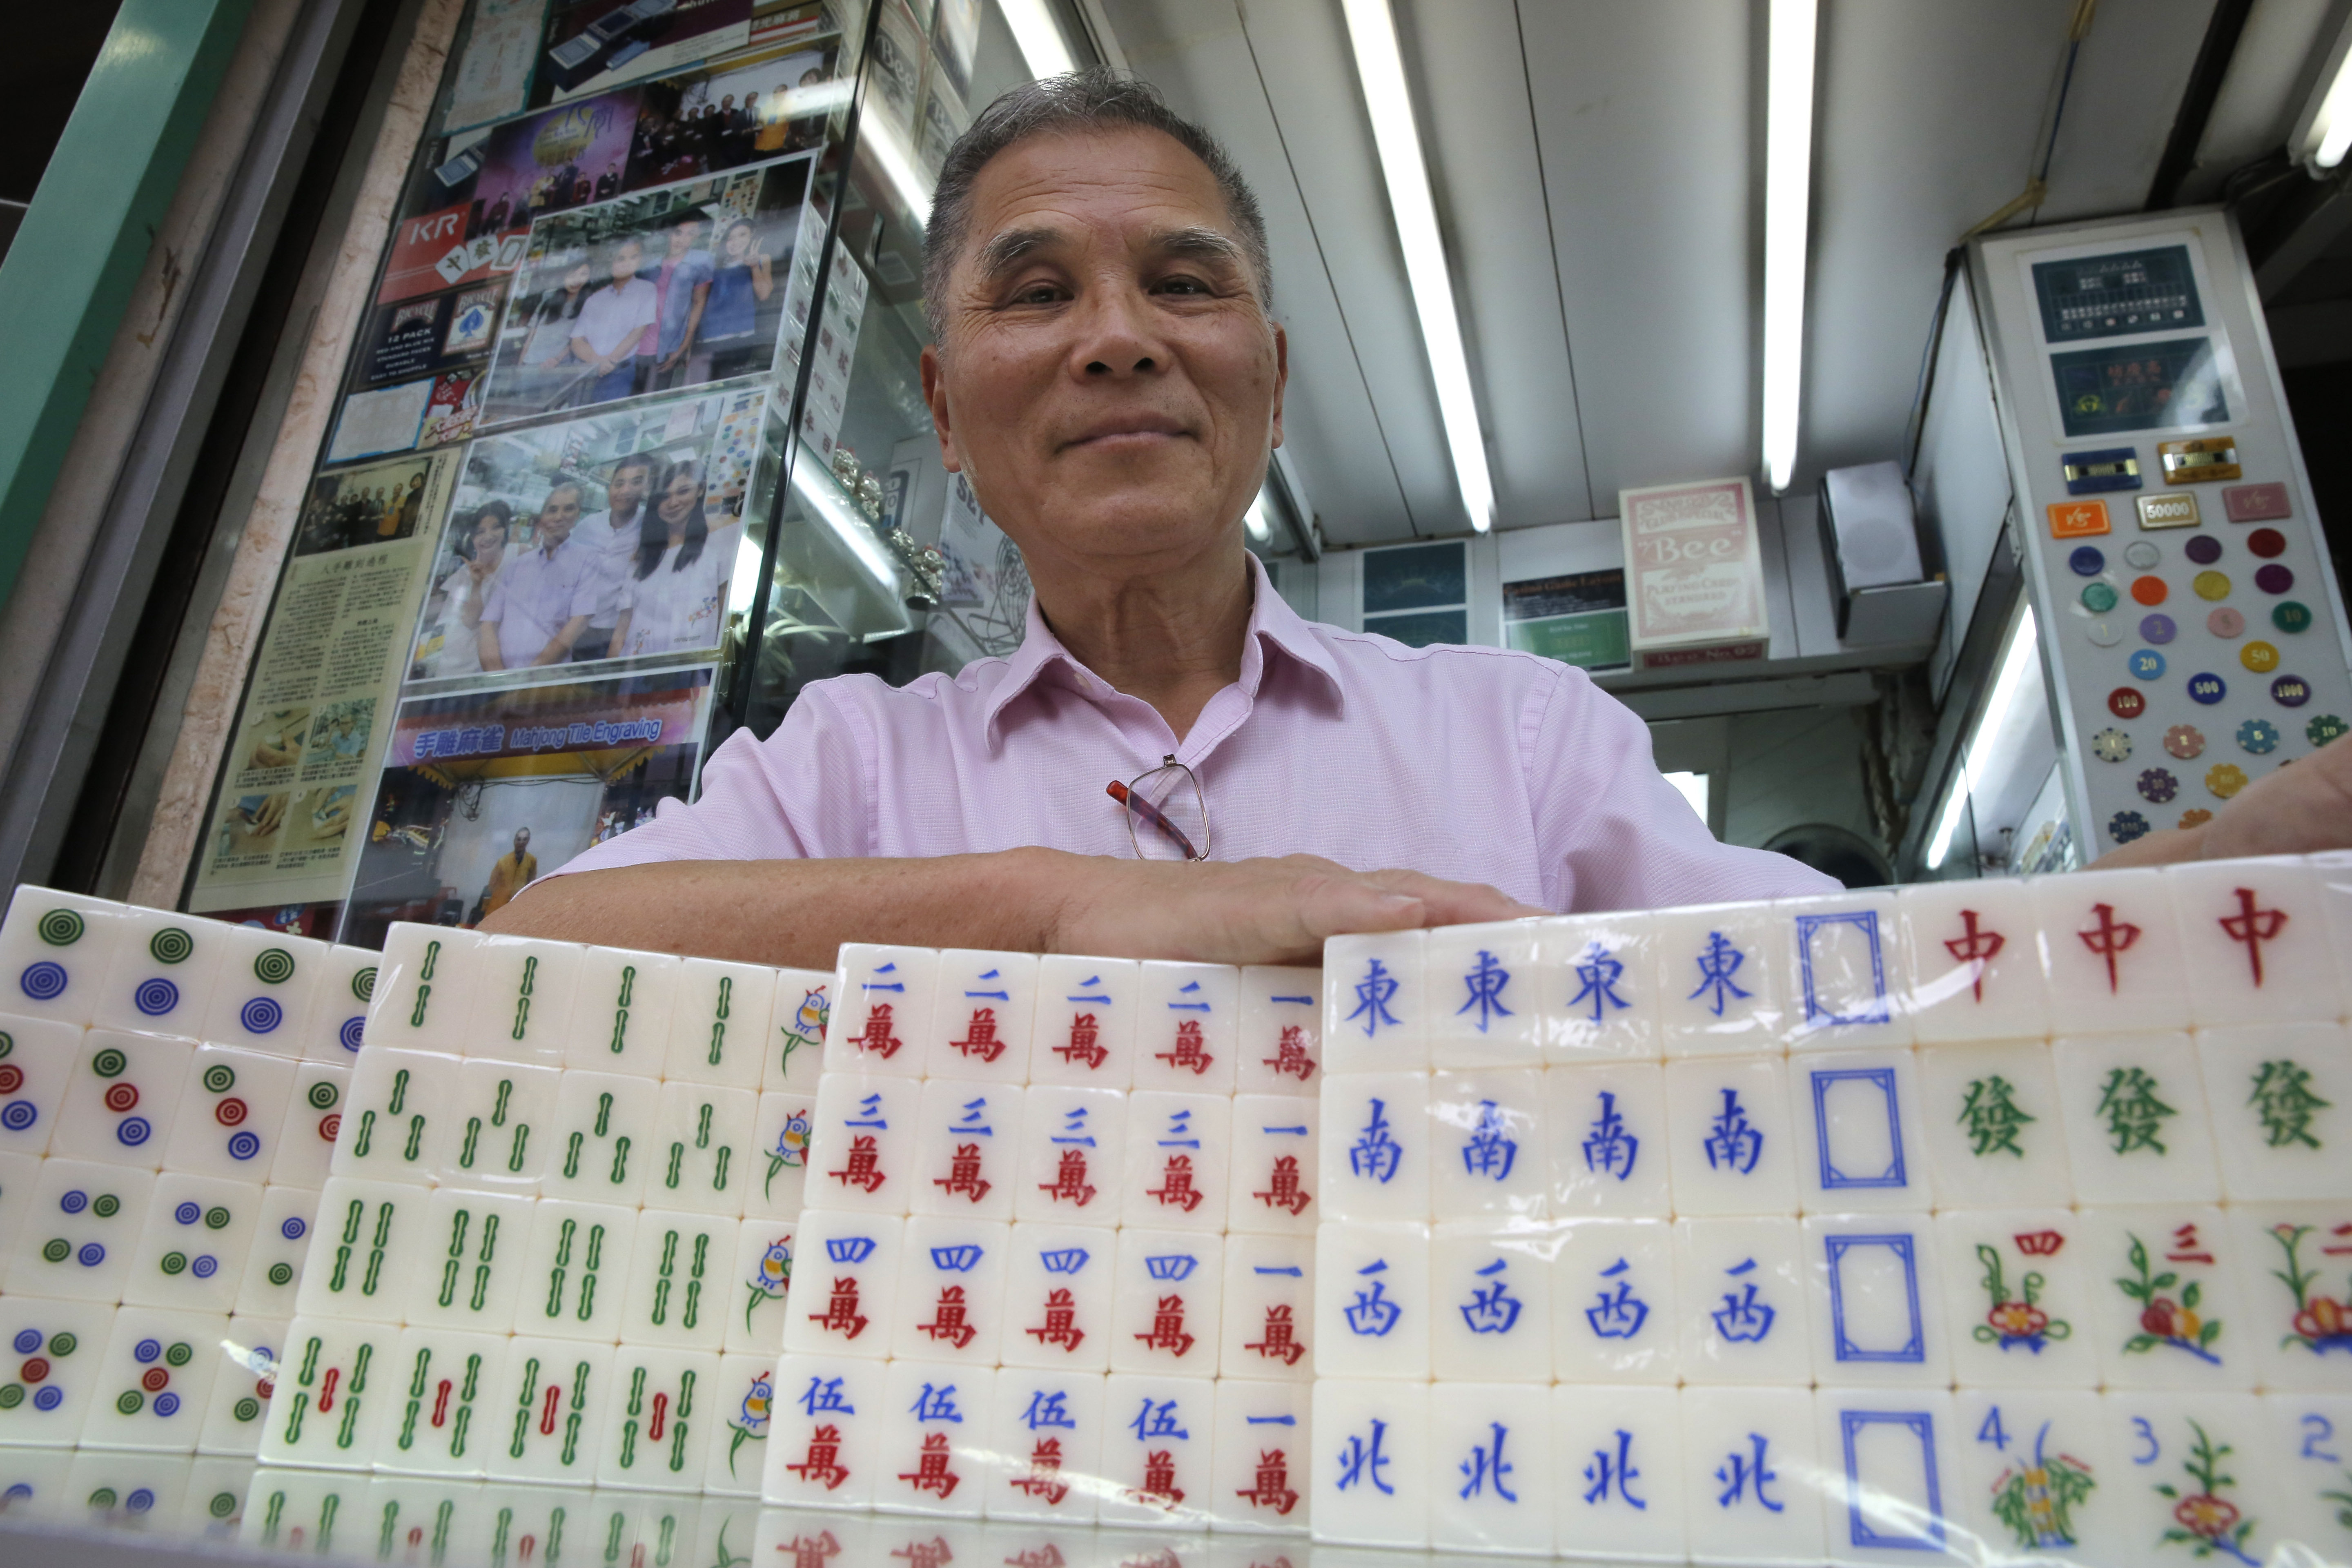 Hand-carved mahjong tiles are a dying craft in Hong Kong